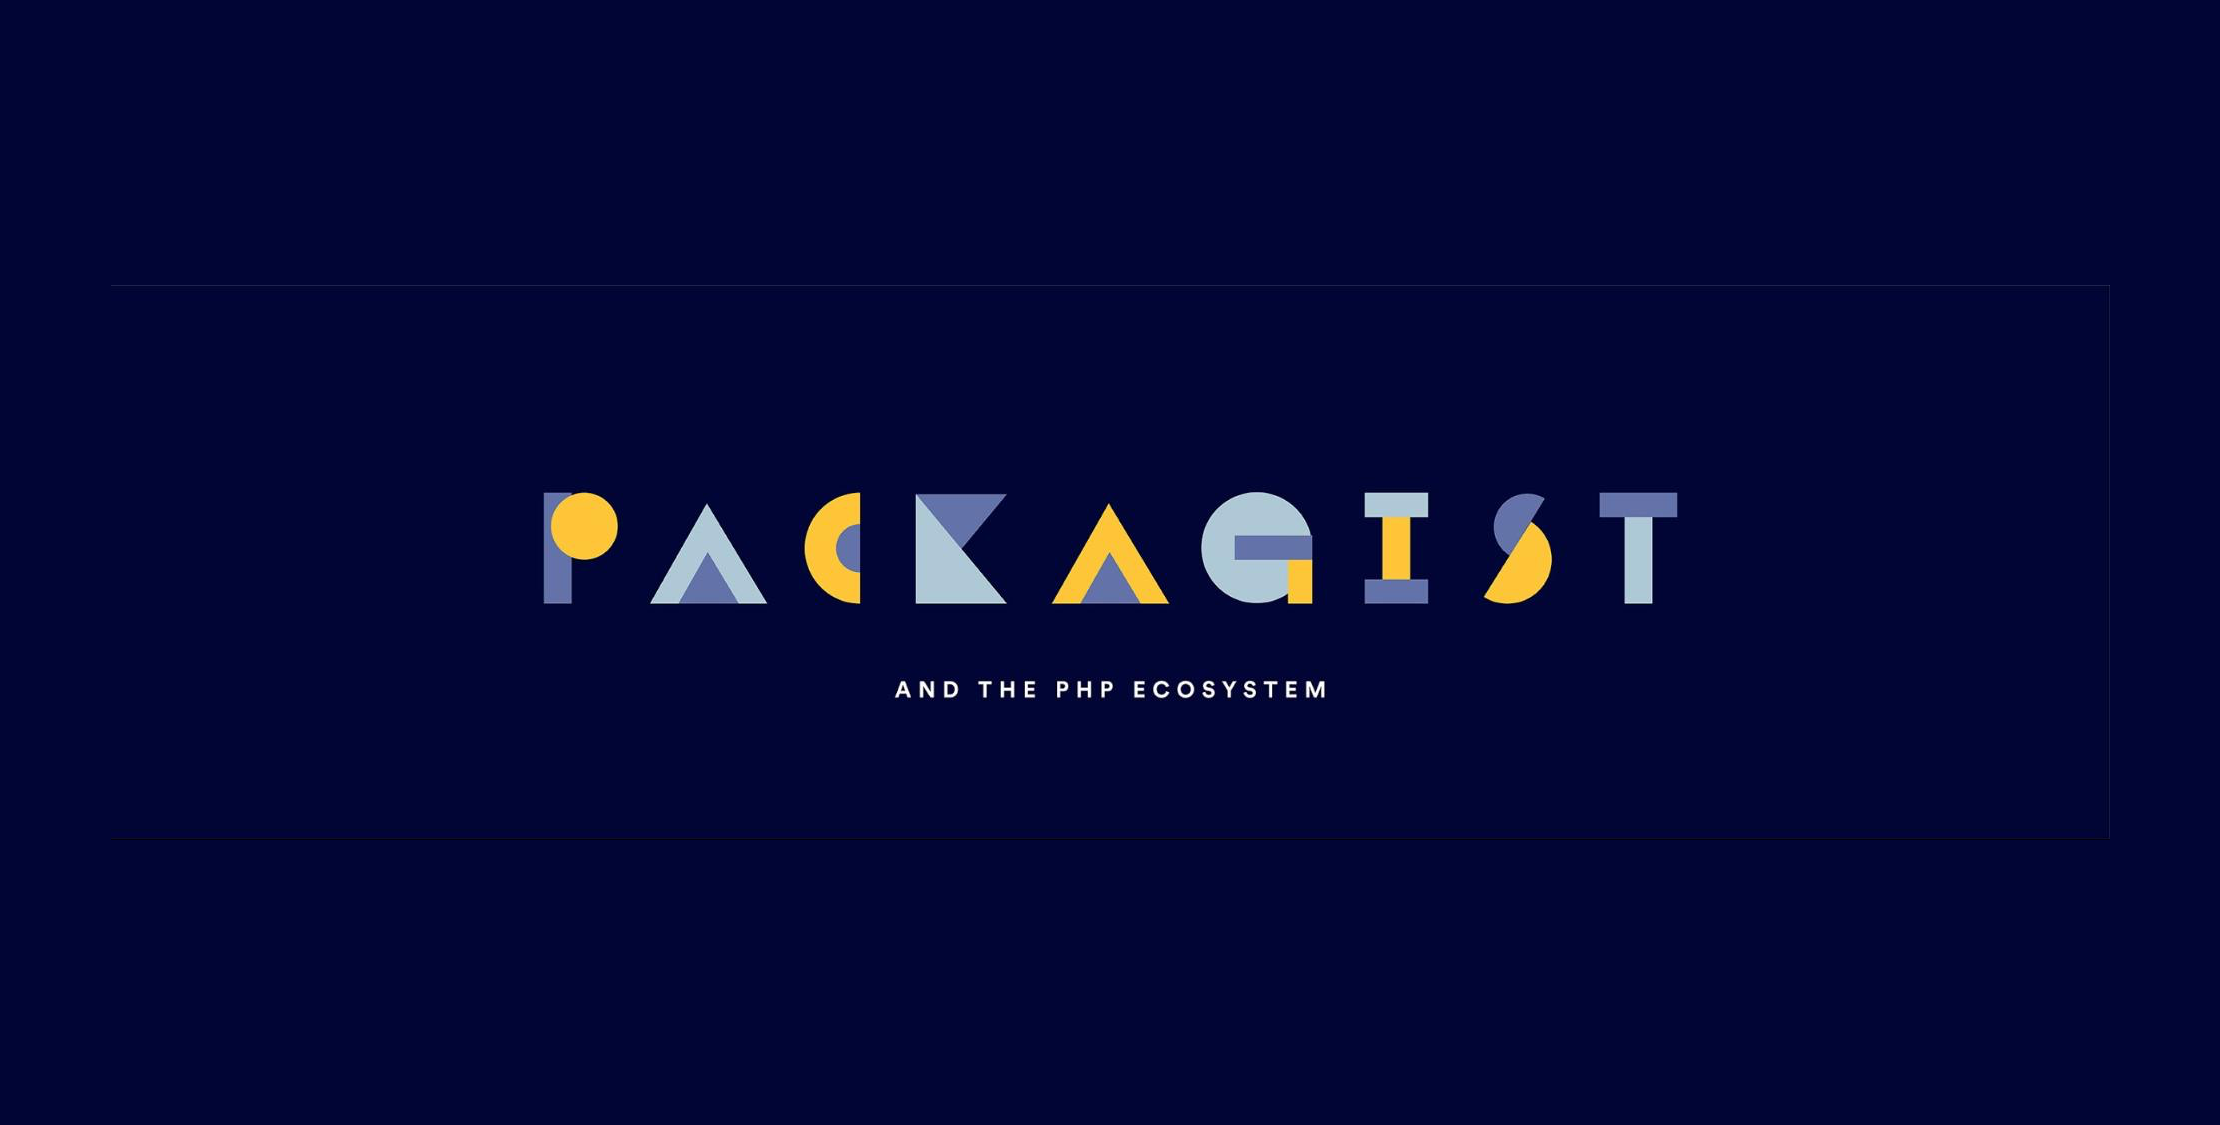 Packagist and the PHP ecosystem image